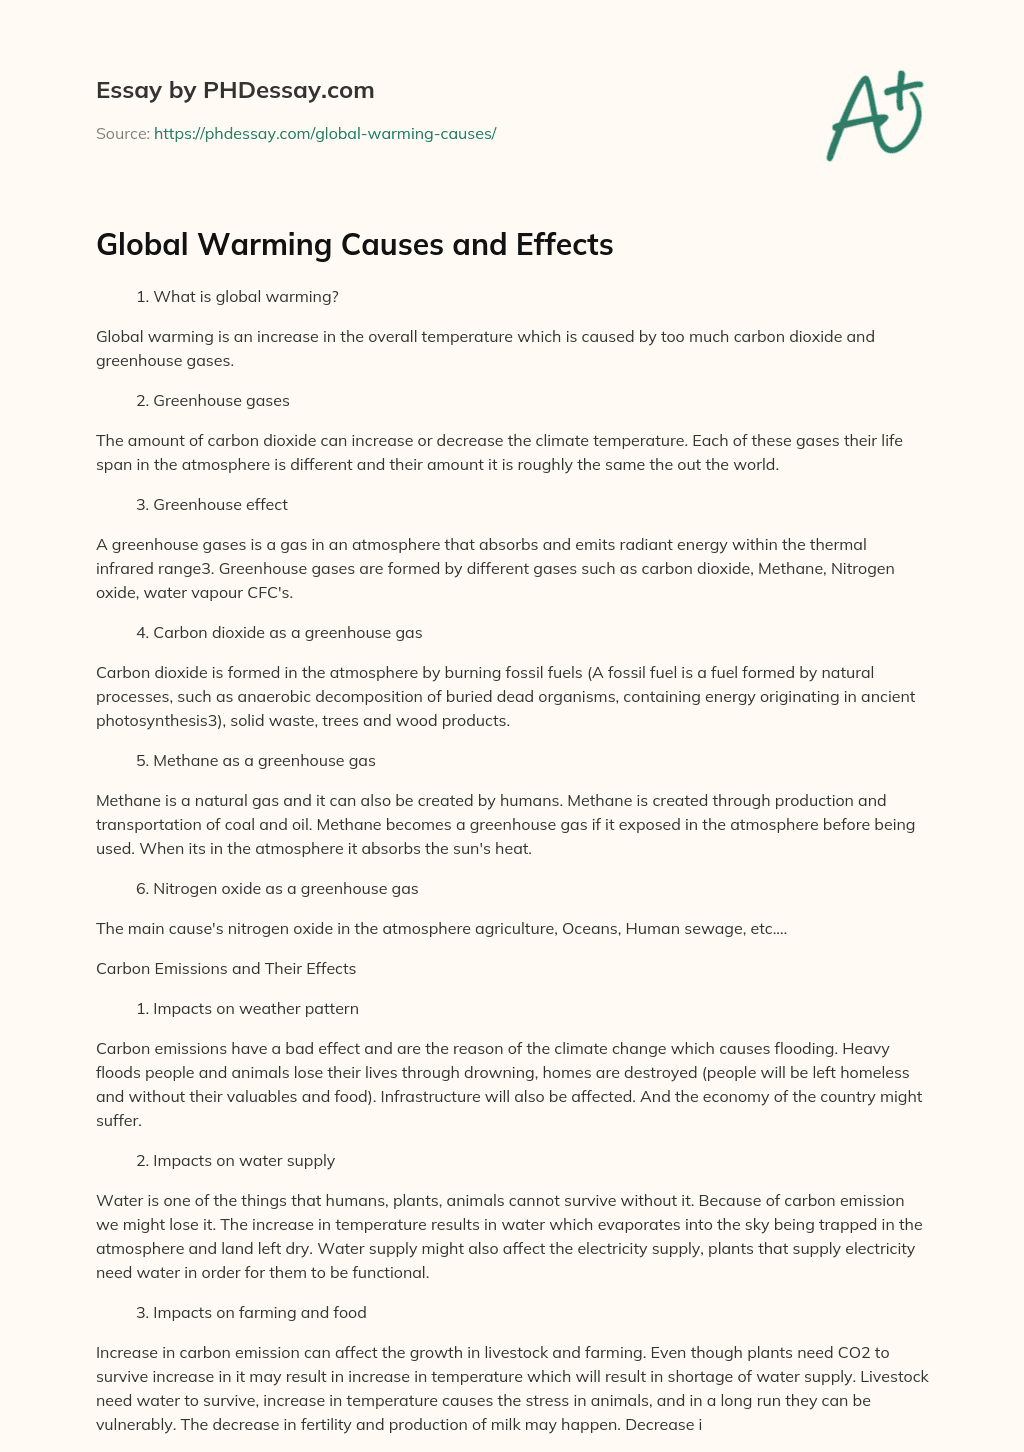 Global Warming Causes and Effects essay